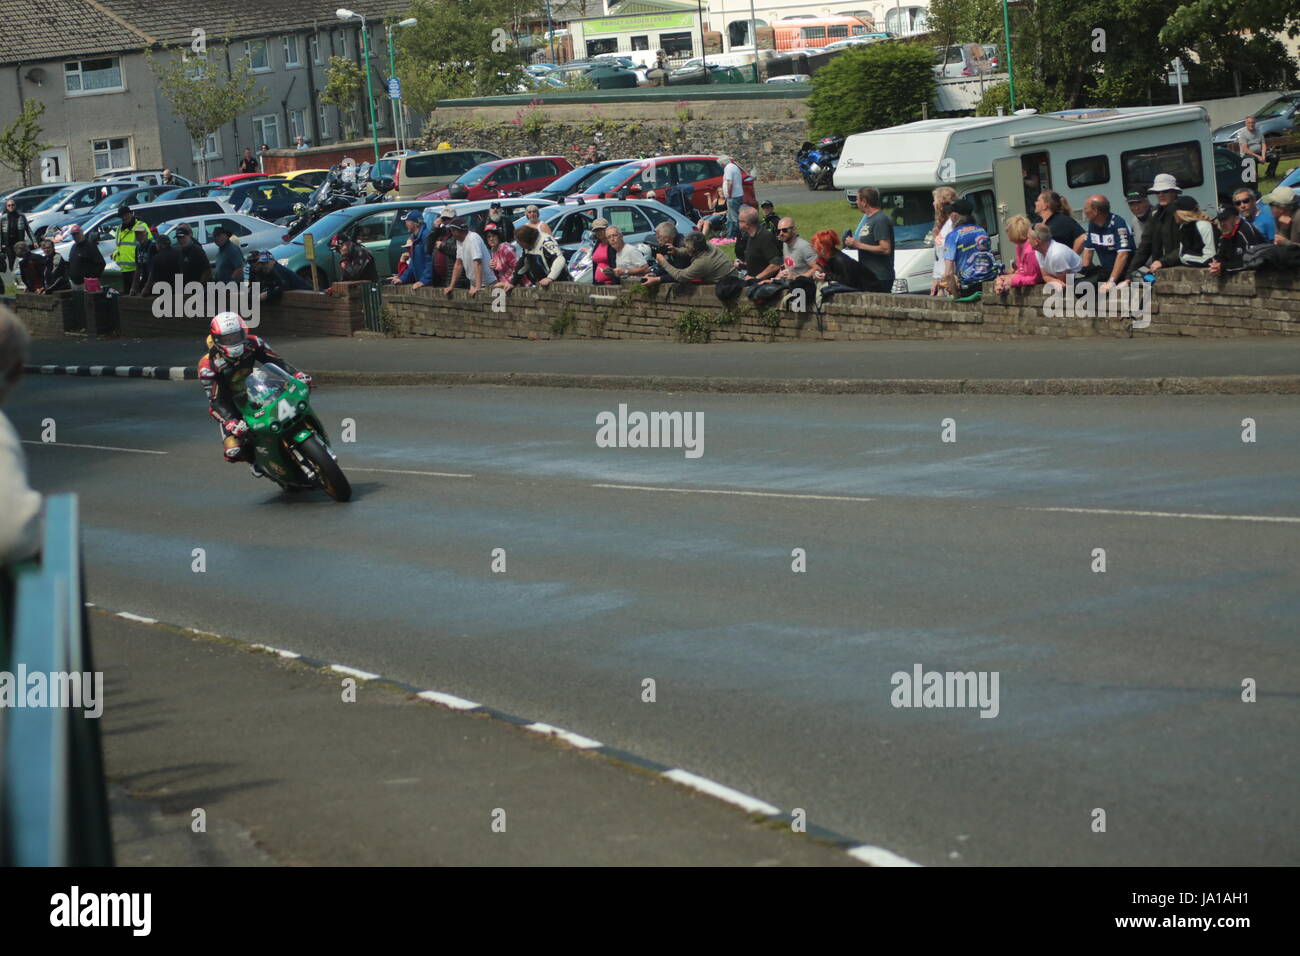 Isle of Man TT Races, Qualifying Practice Race, Saturday 3 June 2017.Sidecar Qualifying and Supersport/Lightweight/Newcomers (all classes) qualifying session. Number 4, Ian Hutchinson from Bingley at Cruickshanks Corner, Ramsey, Isle of Man. Credit: Eclectic Art and Photography/Alamy Live News Stock Photo